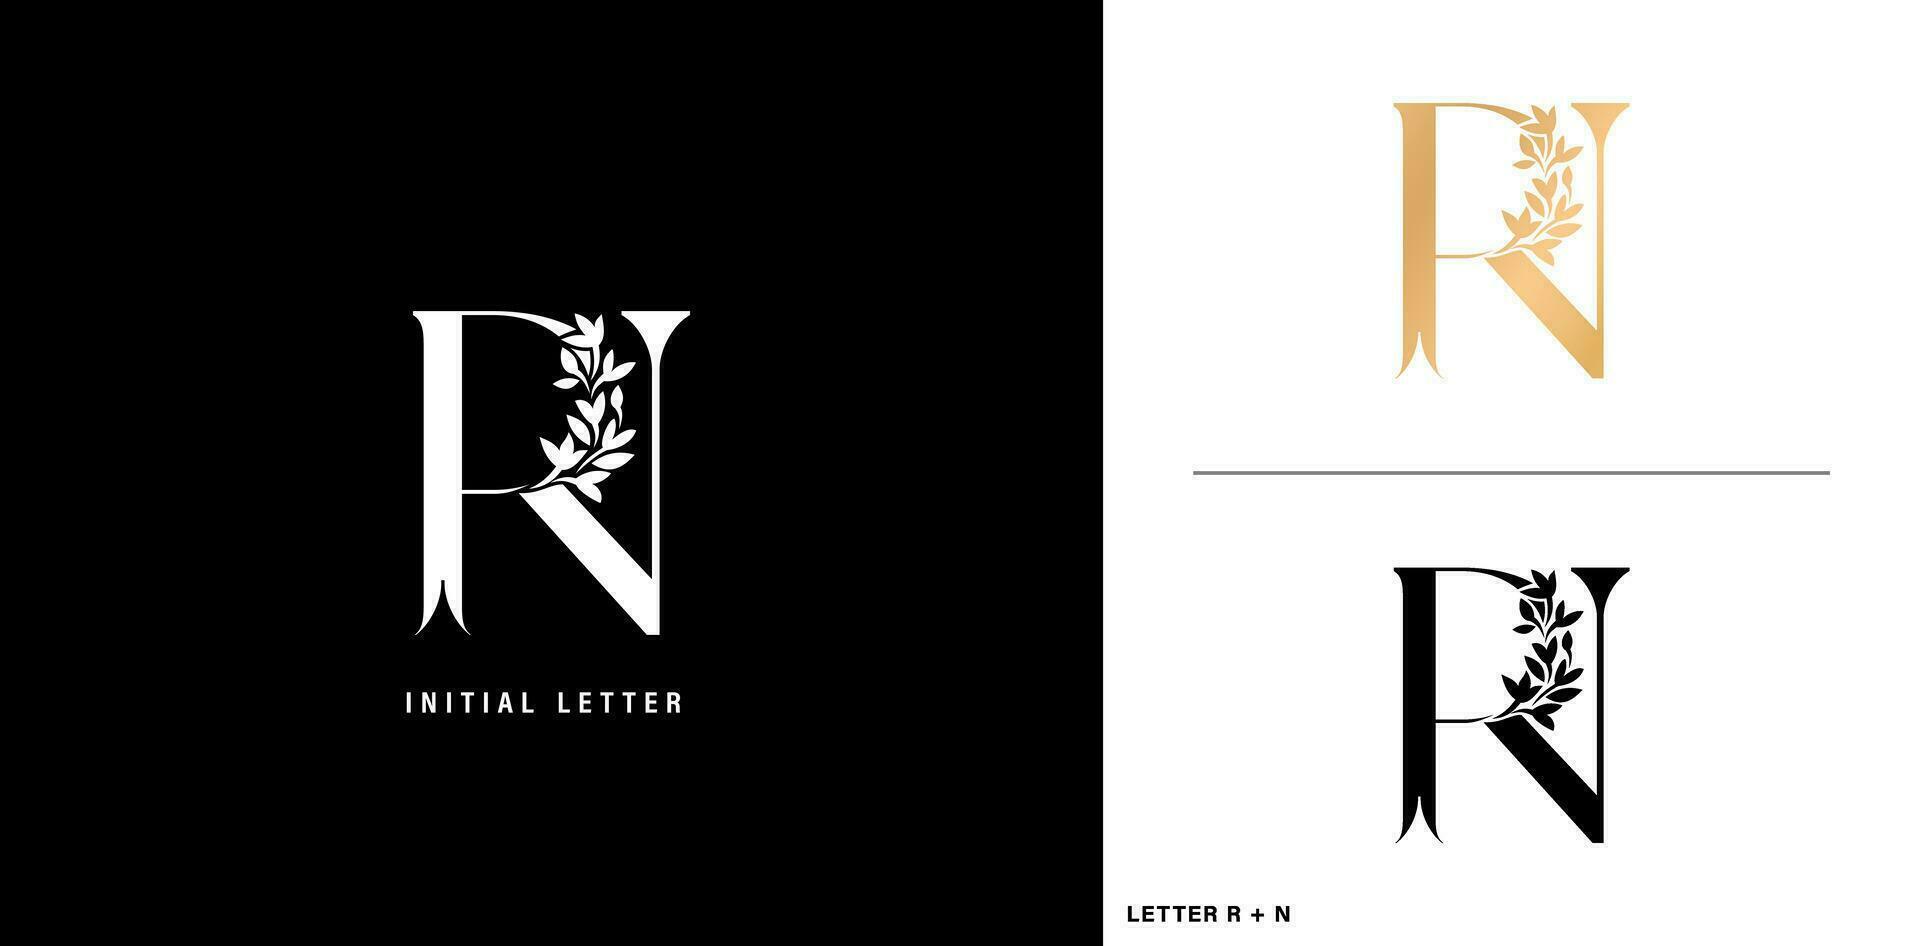 RN initial letters monogram logotype template with floral ornament for business cards elements, branding company identity, advertisement materials golden foil, collages prints, ads campaigns marketing vector